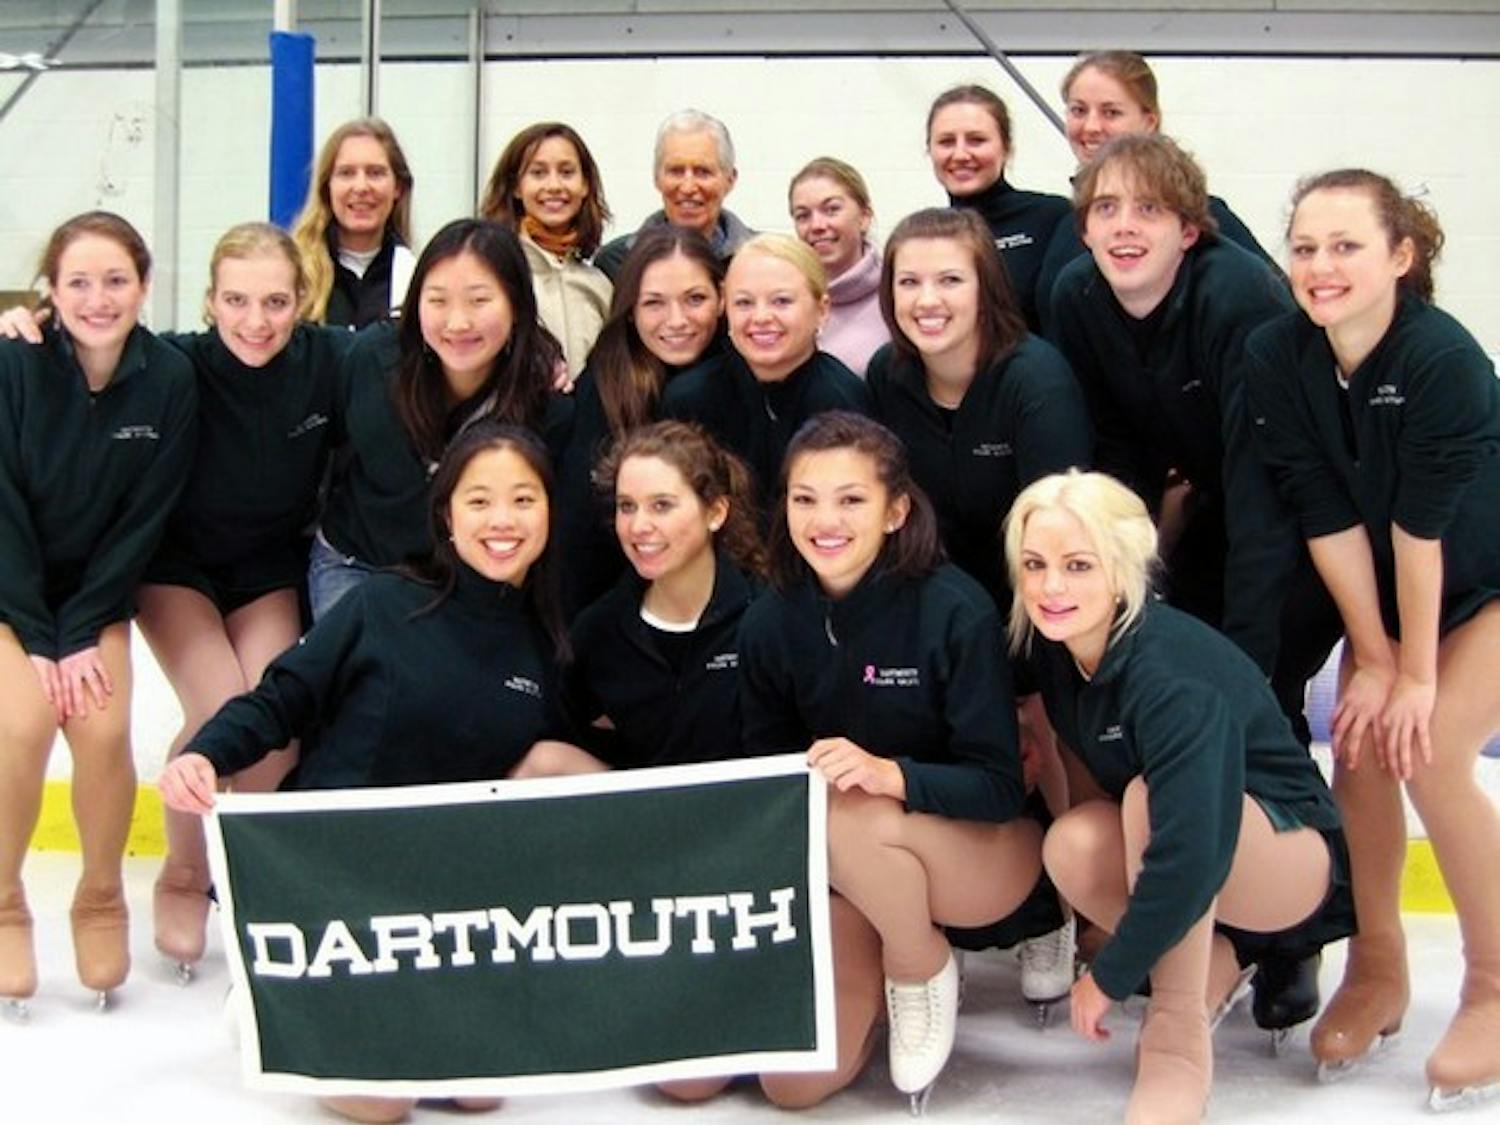 Dartmouth figure skaters celebrate yet another dominant campaign. The team will lose a number of valued contributors from this year's squad.